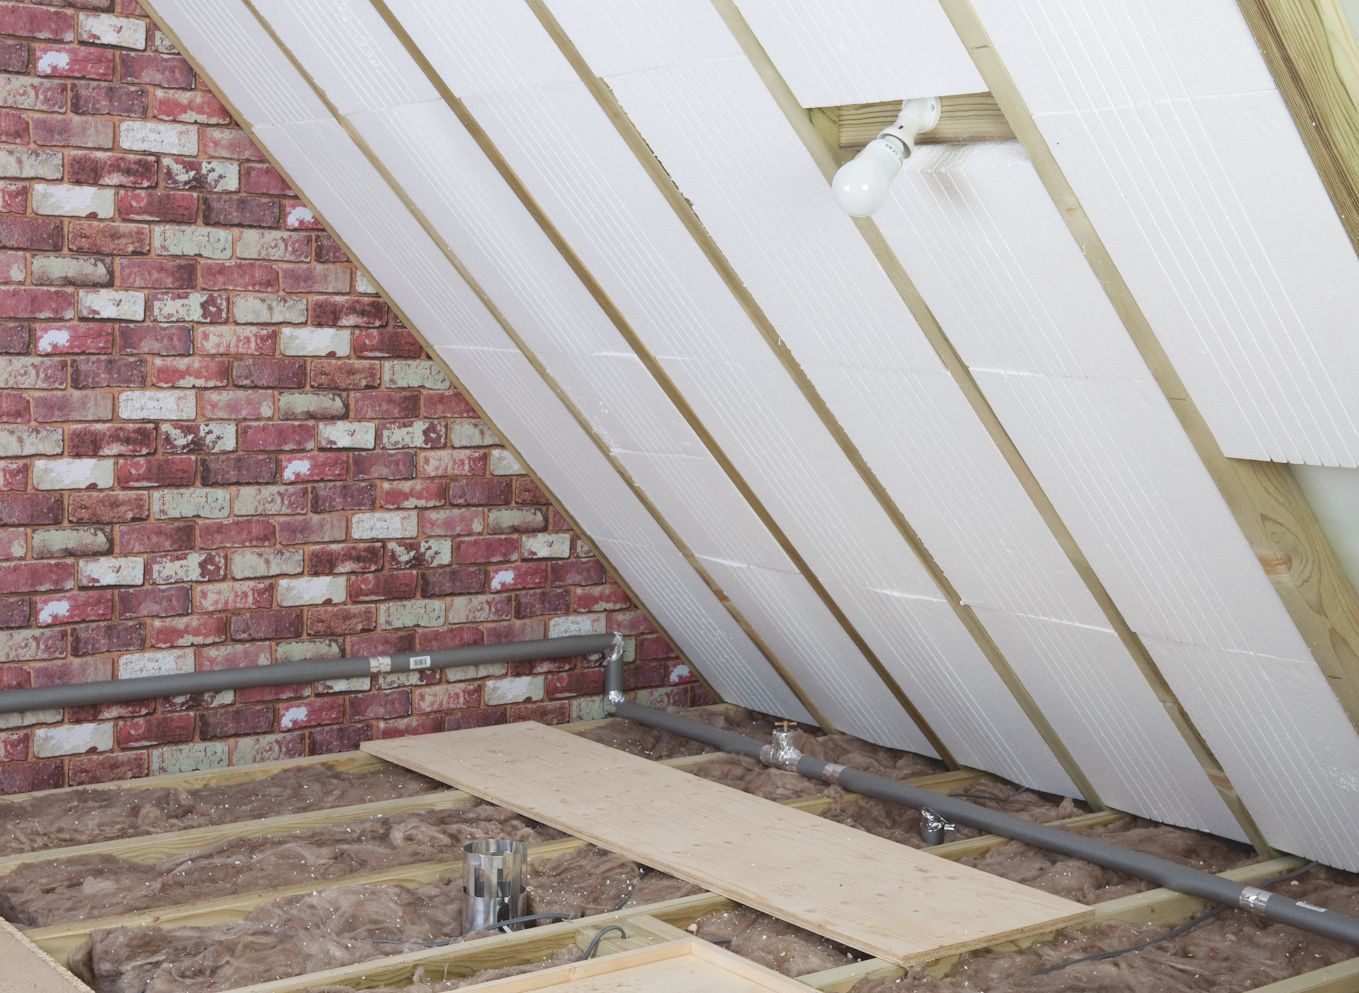 Is It Better To Insulate Ceiling Or Roof? | Home Logic